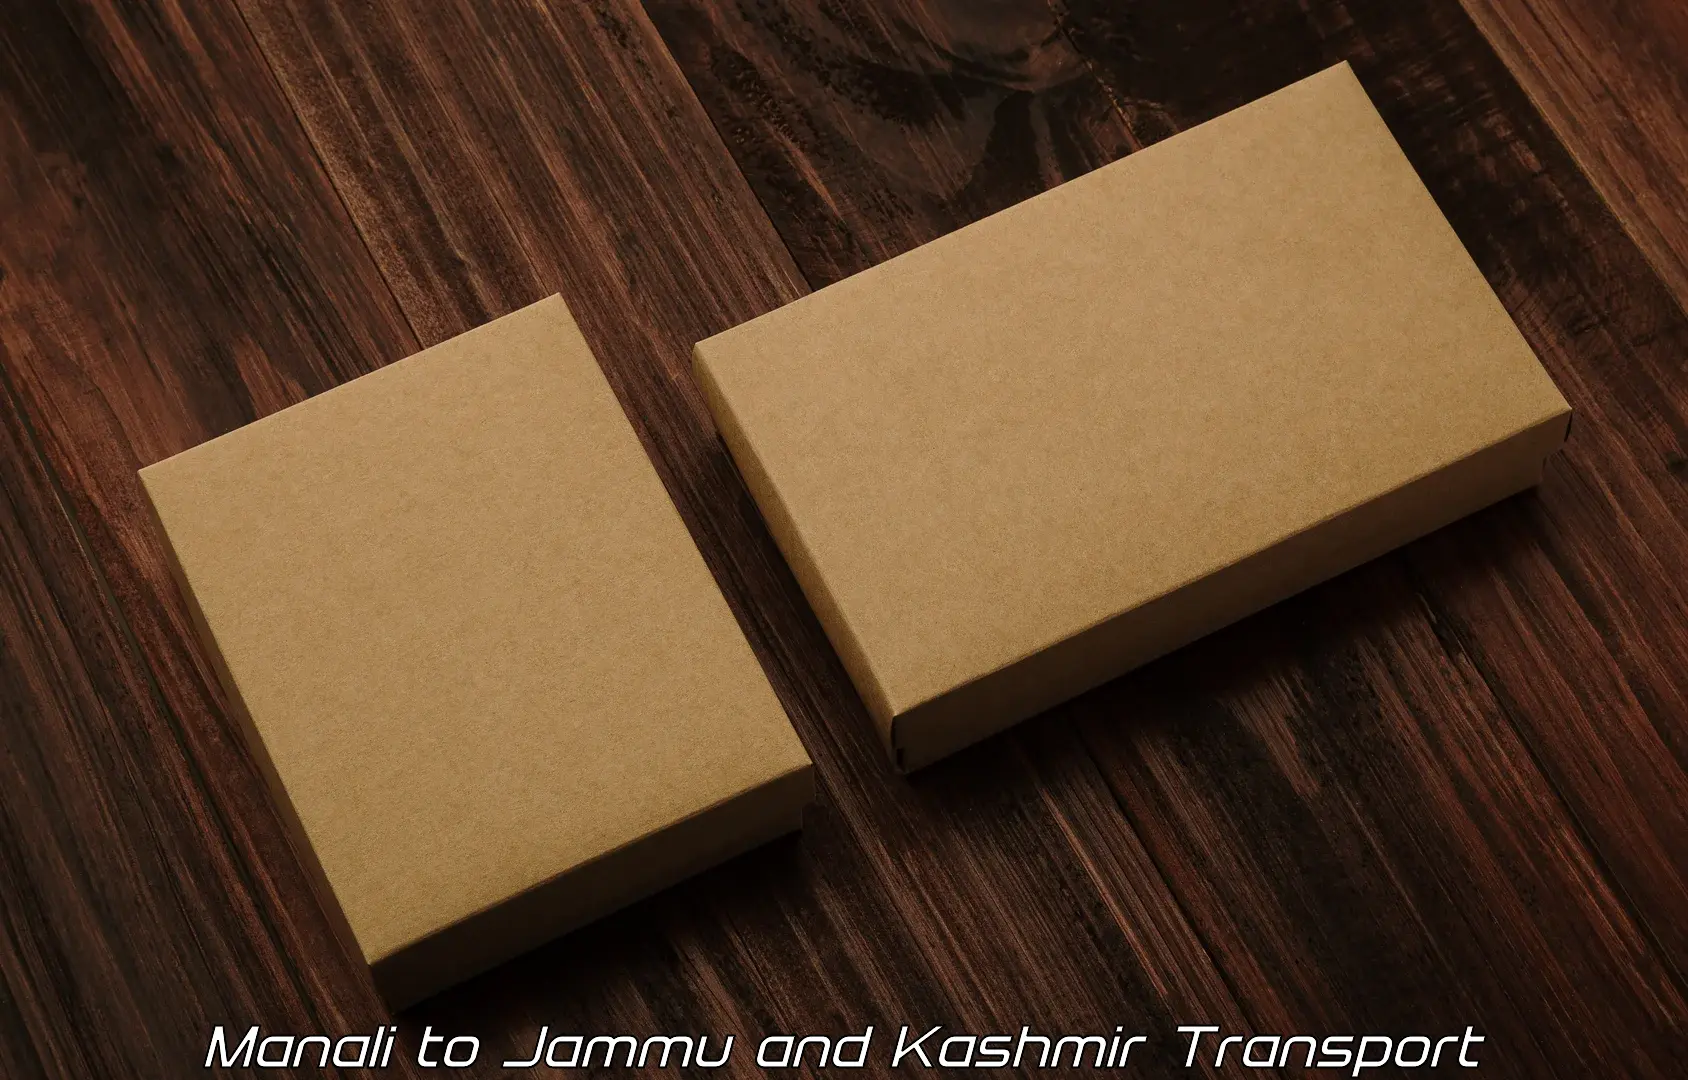 Two wheeler parcel service Manali to Jammu and Kashmir